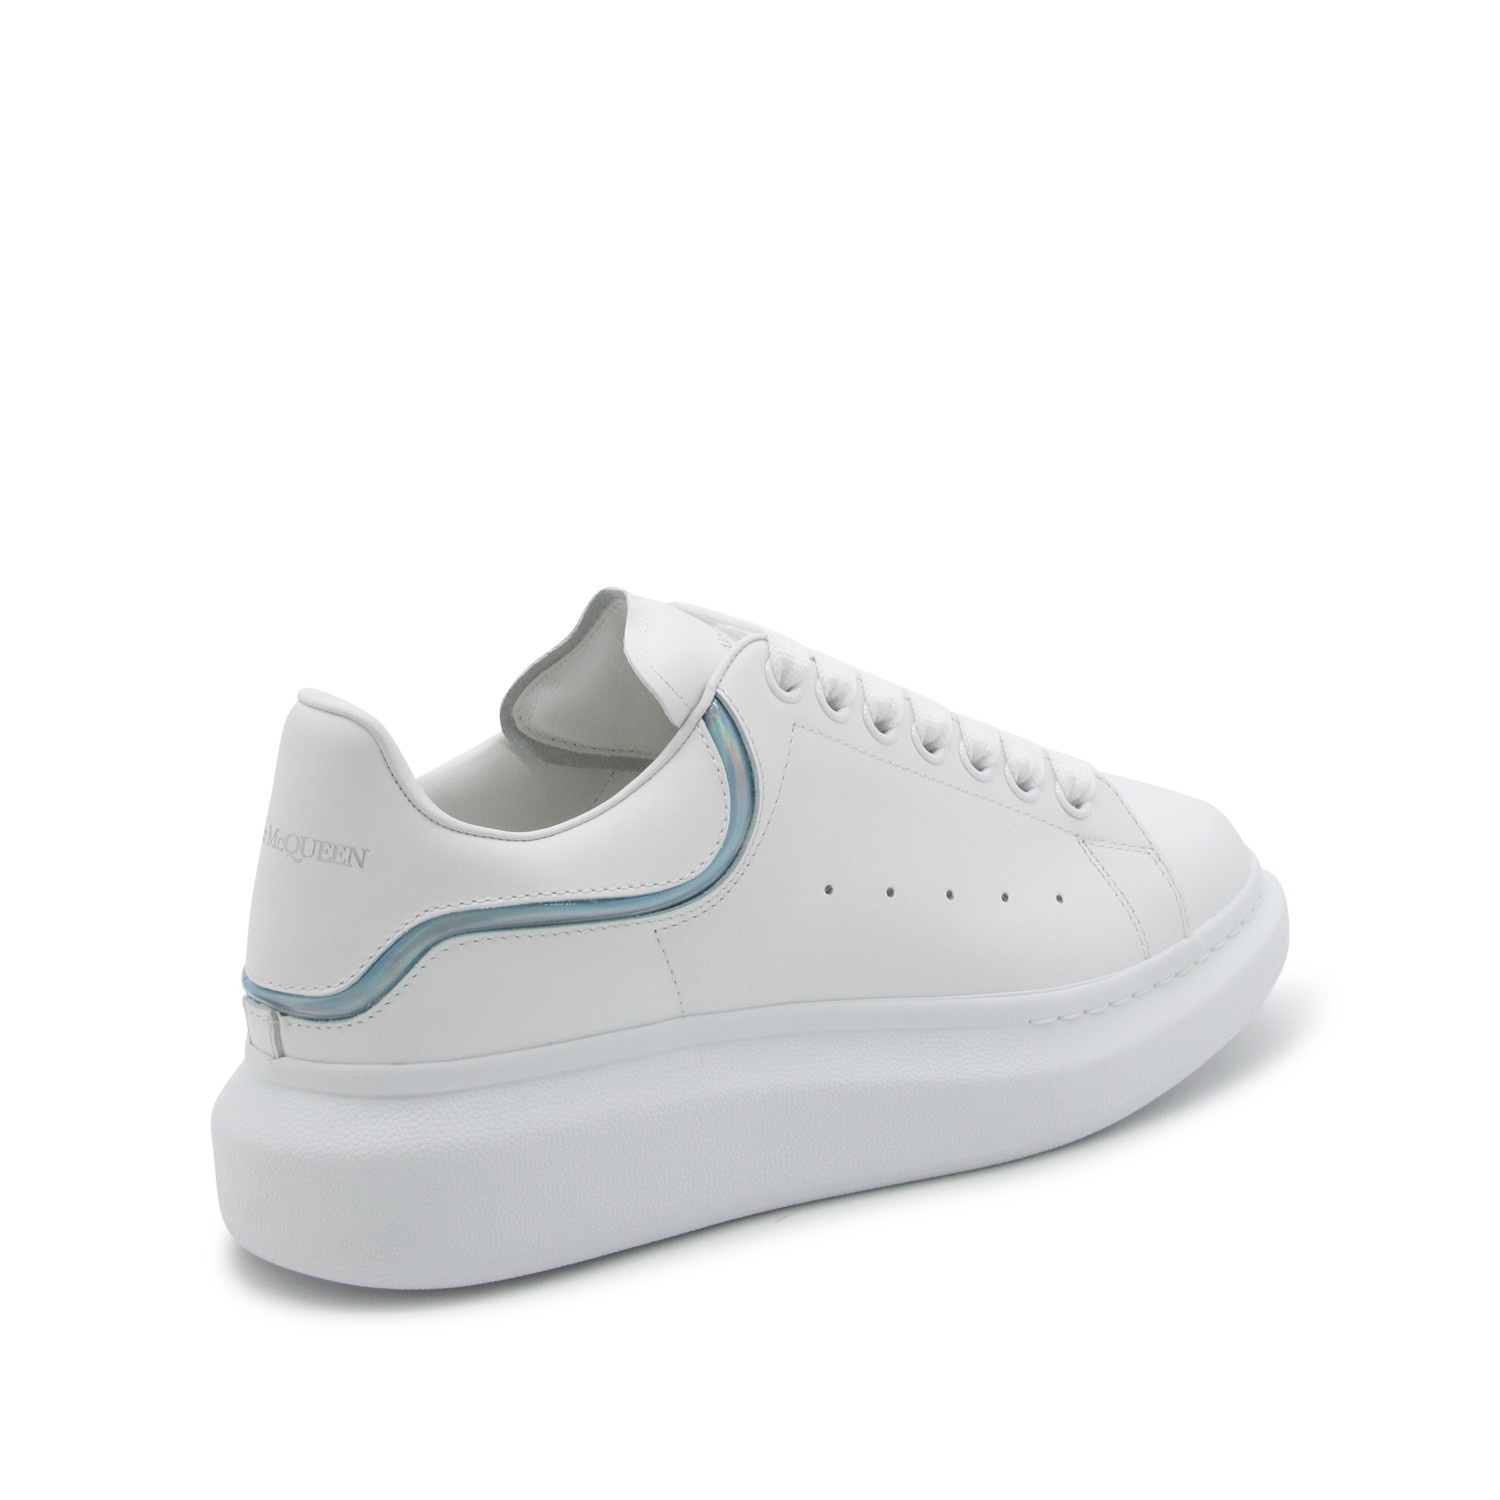 WHITE MULTICOLOUR LEATHER OVERSIZED SNEAKERS - 3